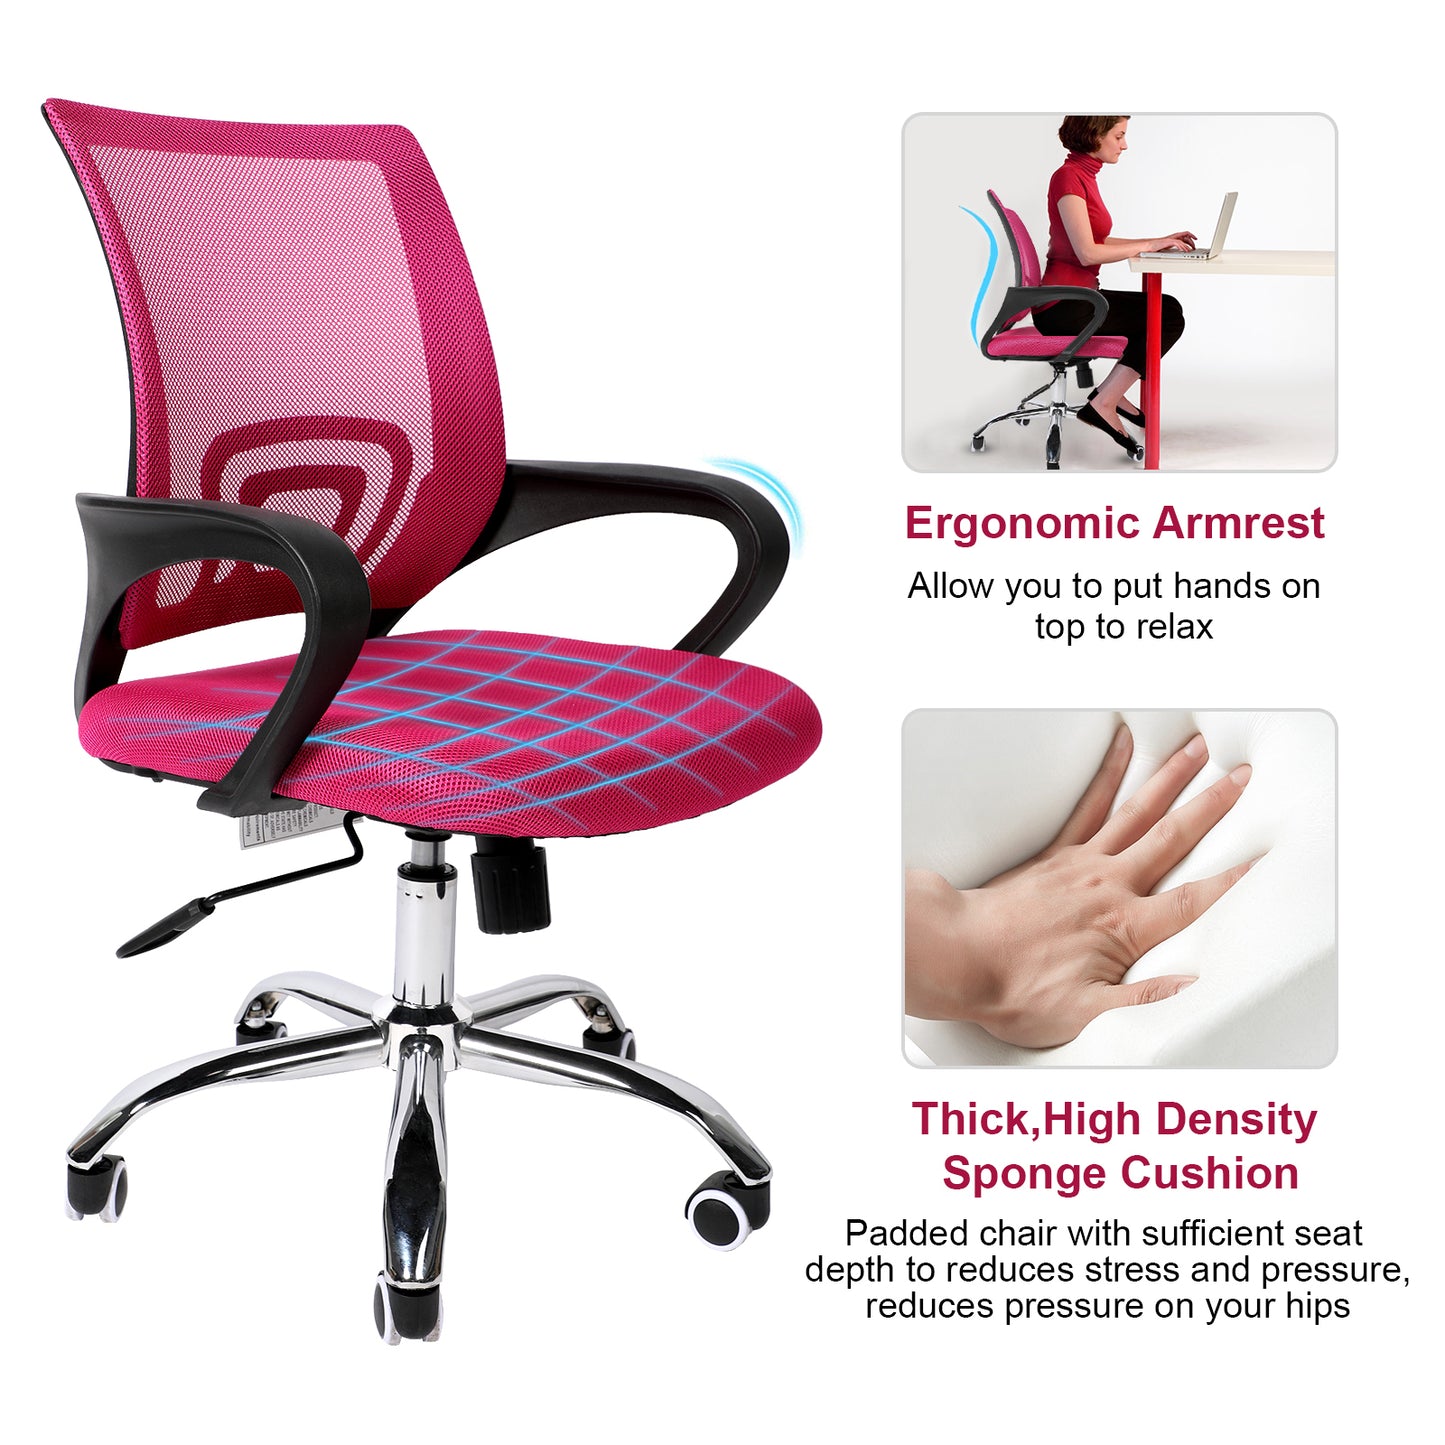 YSSOA Task Ergonomic Mesh Computer Wheels and Arms and Lumbar Support Study Chair for Students Teens Men Women for Dorm Home Office, Adjustable Height, Pink